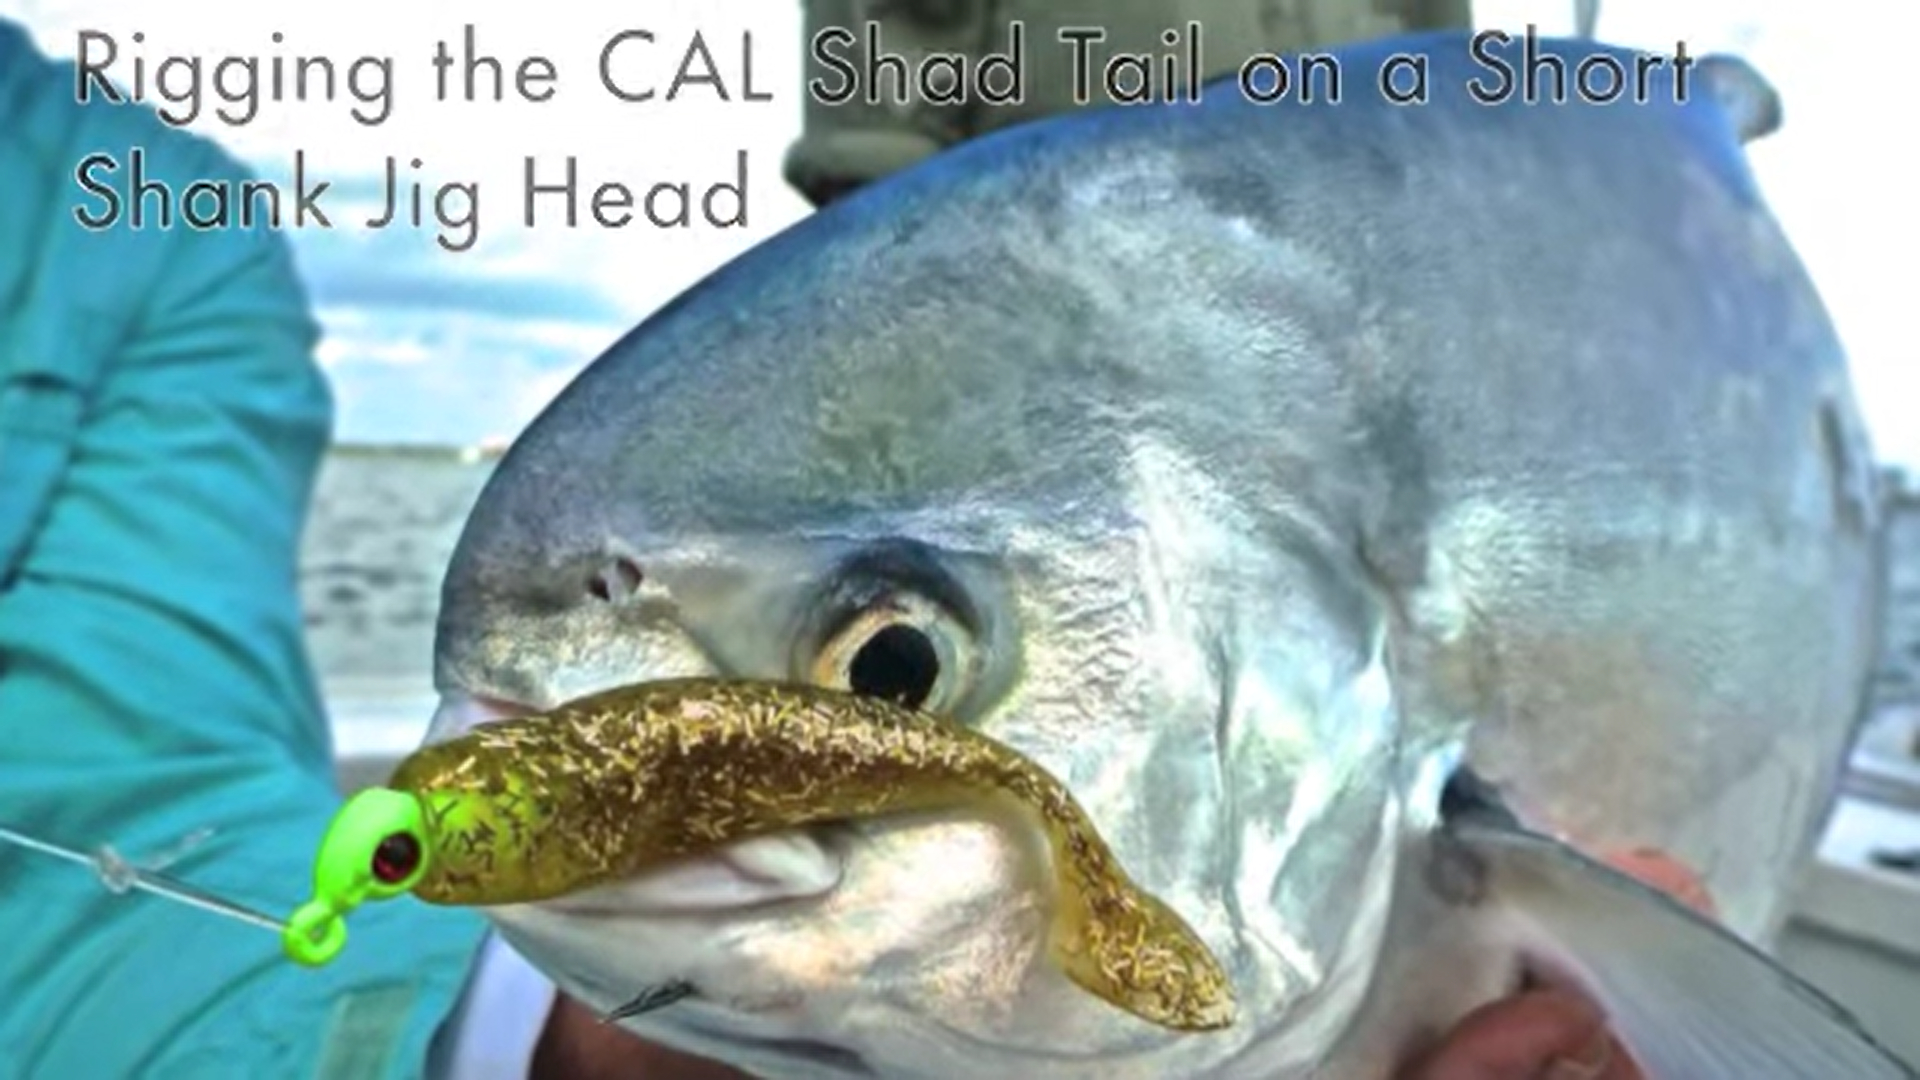 D.O.A. C.A.L. 3-inch Shad Tail